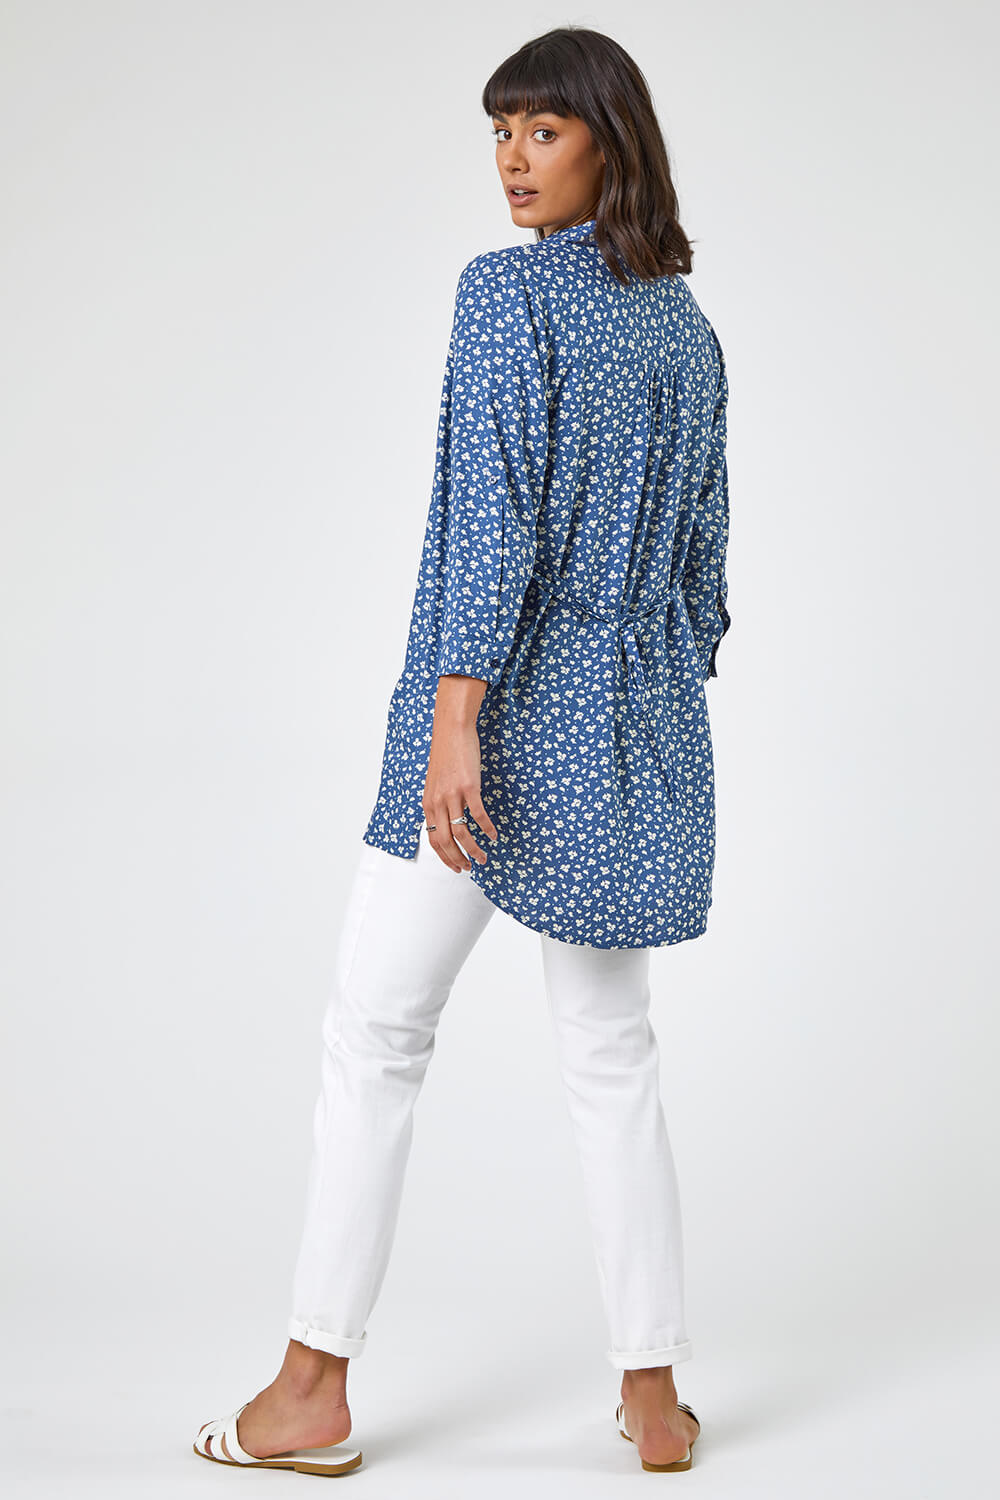 Ditsy Floral Print Belted Blouse in Blue - Roman Originals UK